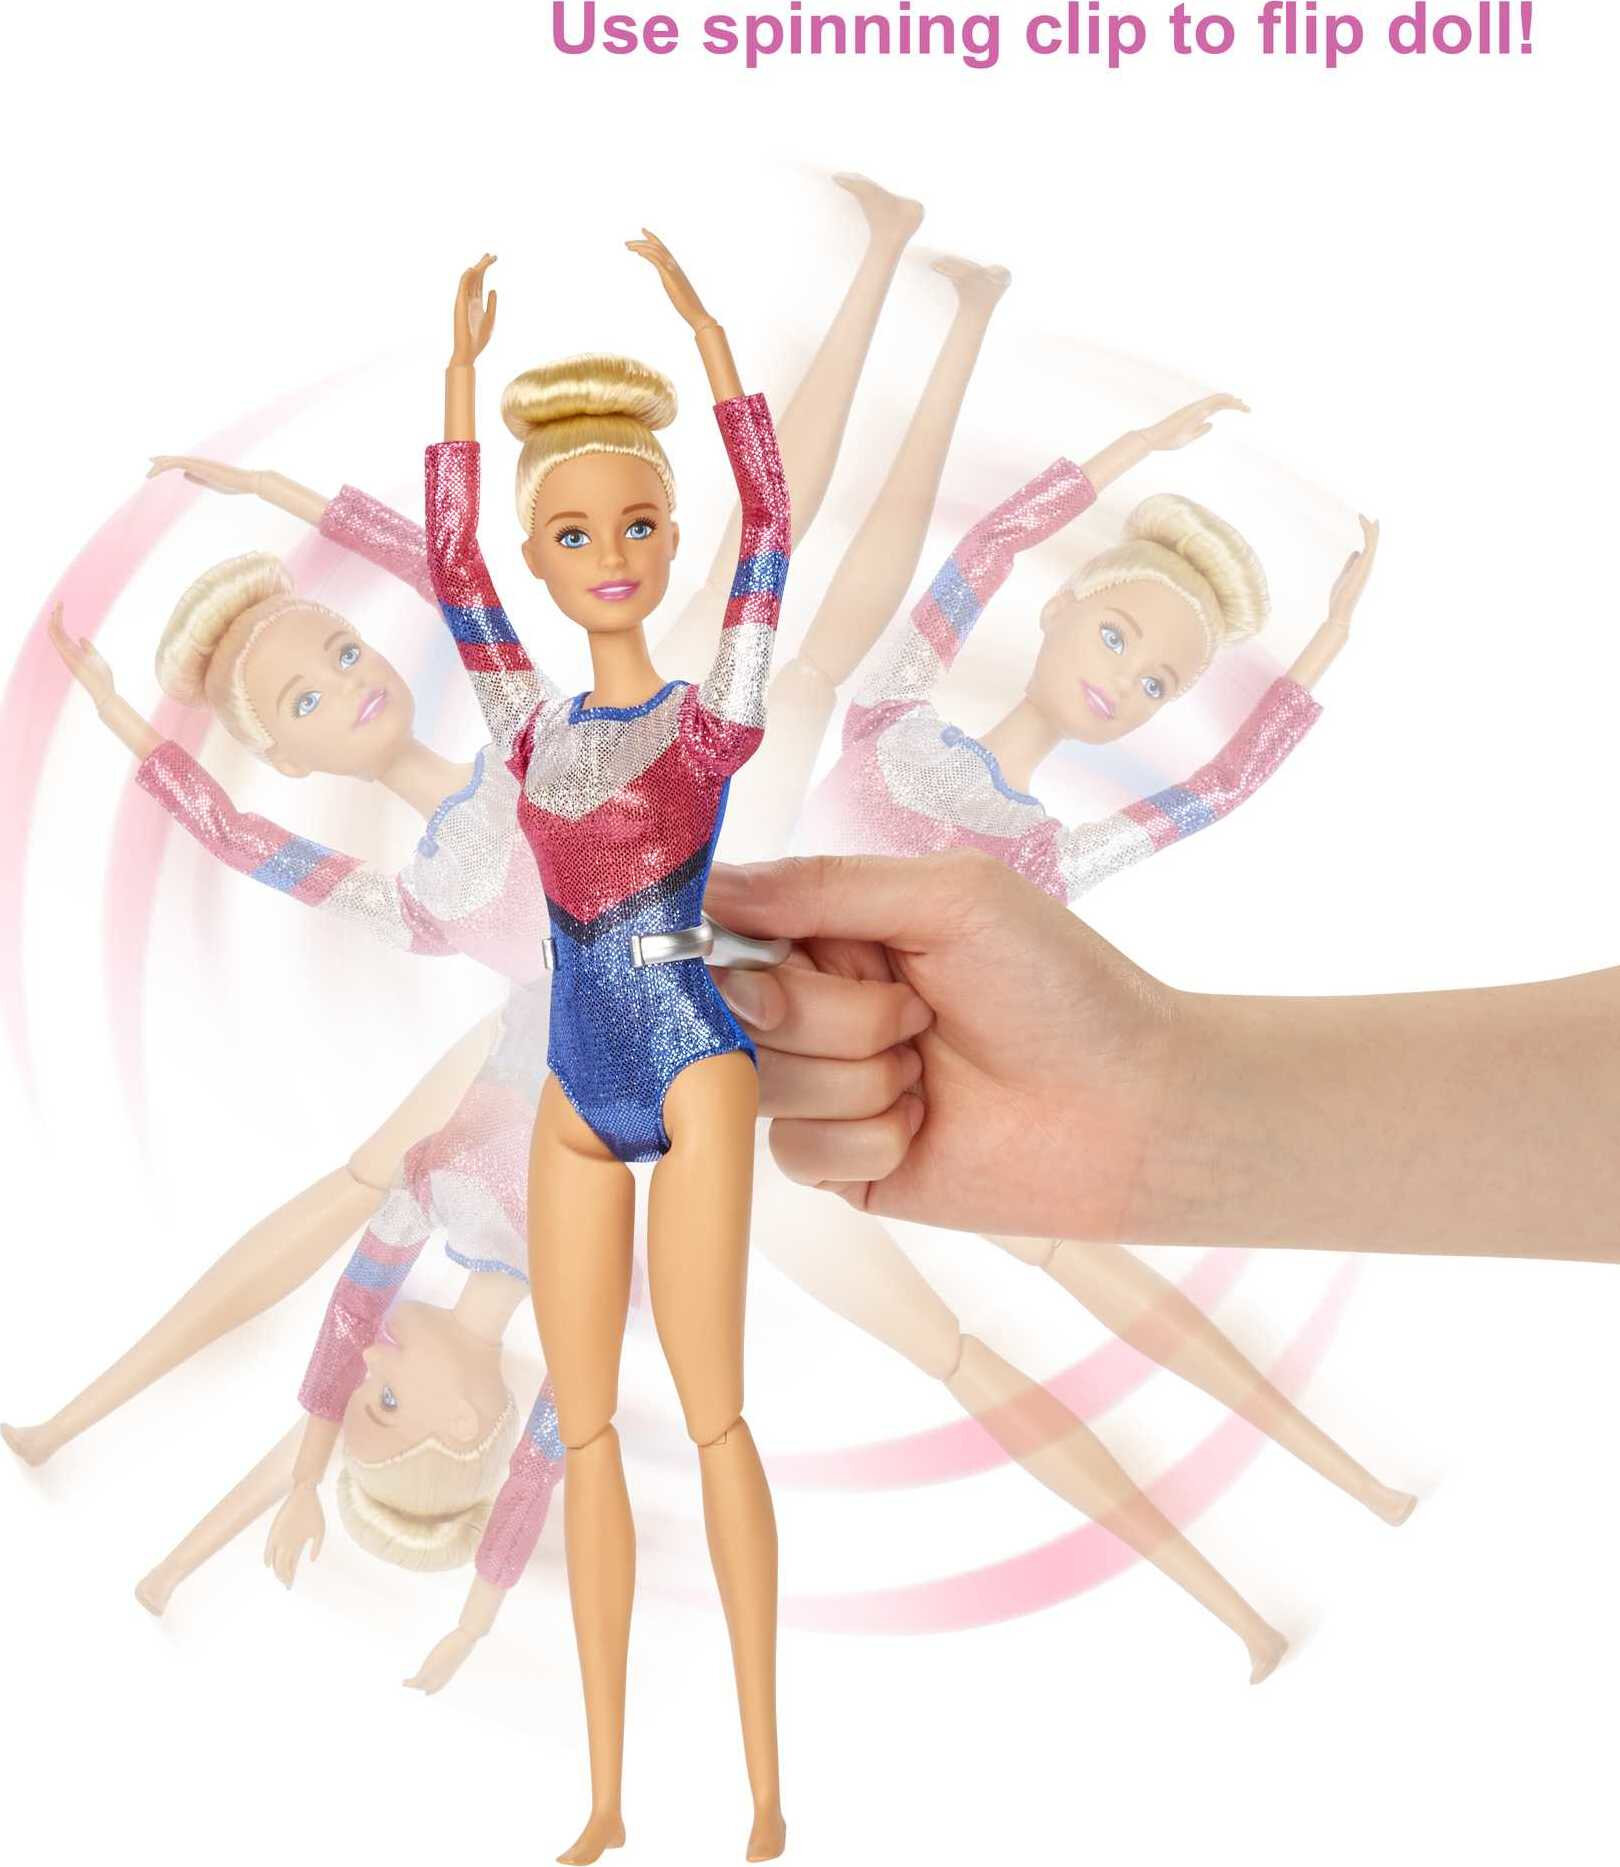 Barbie Gymnastics Playset with Blonde Doll and 15+ Accessories, Twirling Gymnast Toy with Balance Beam - image 5 of 6